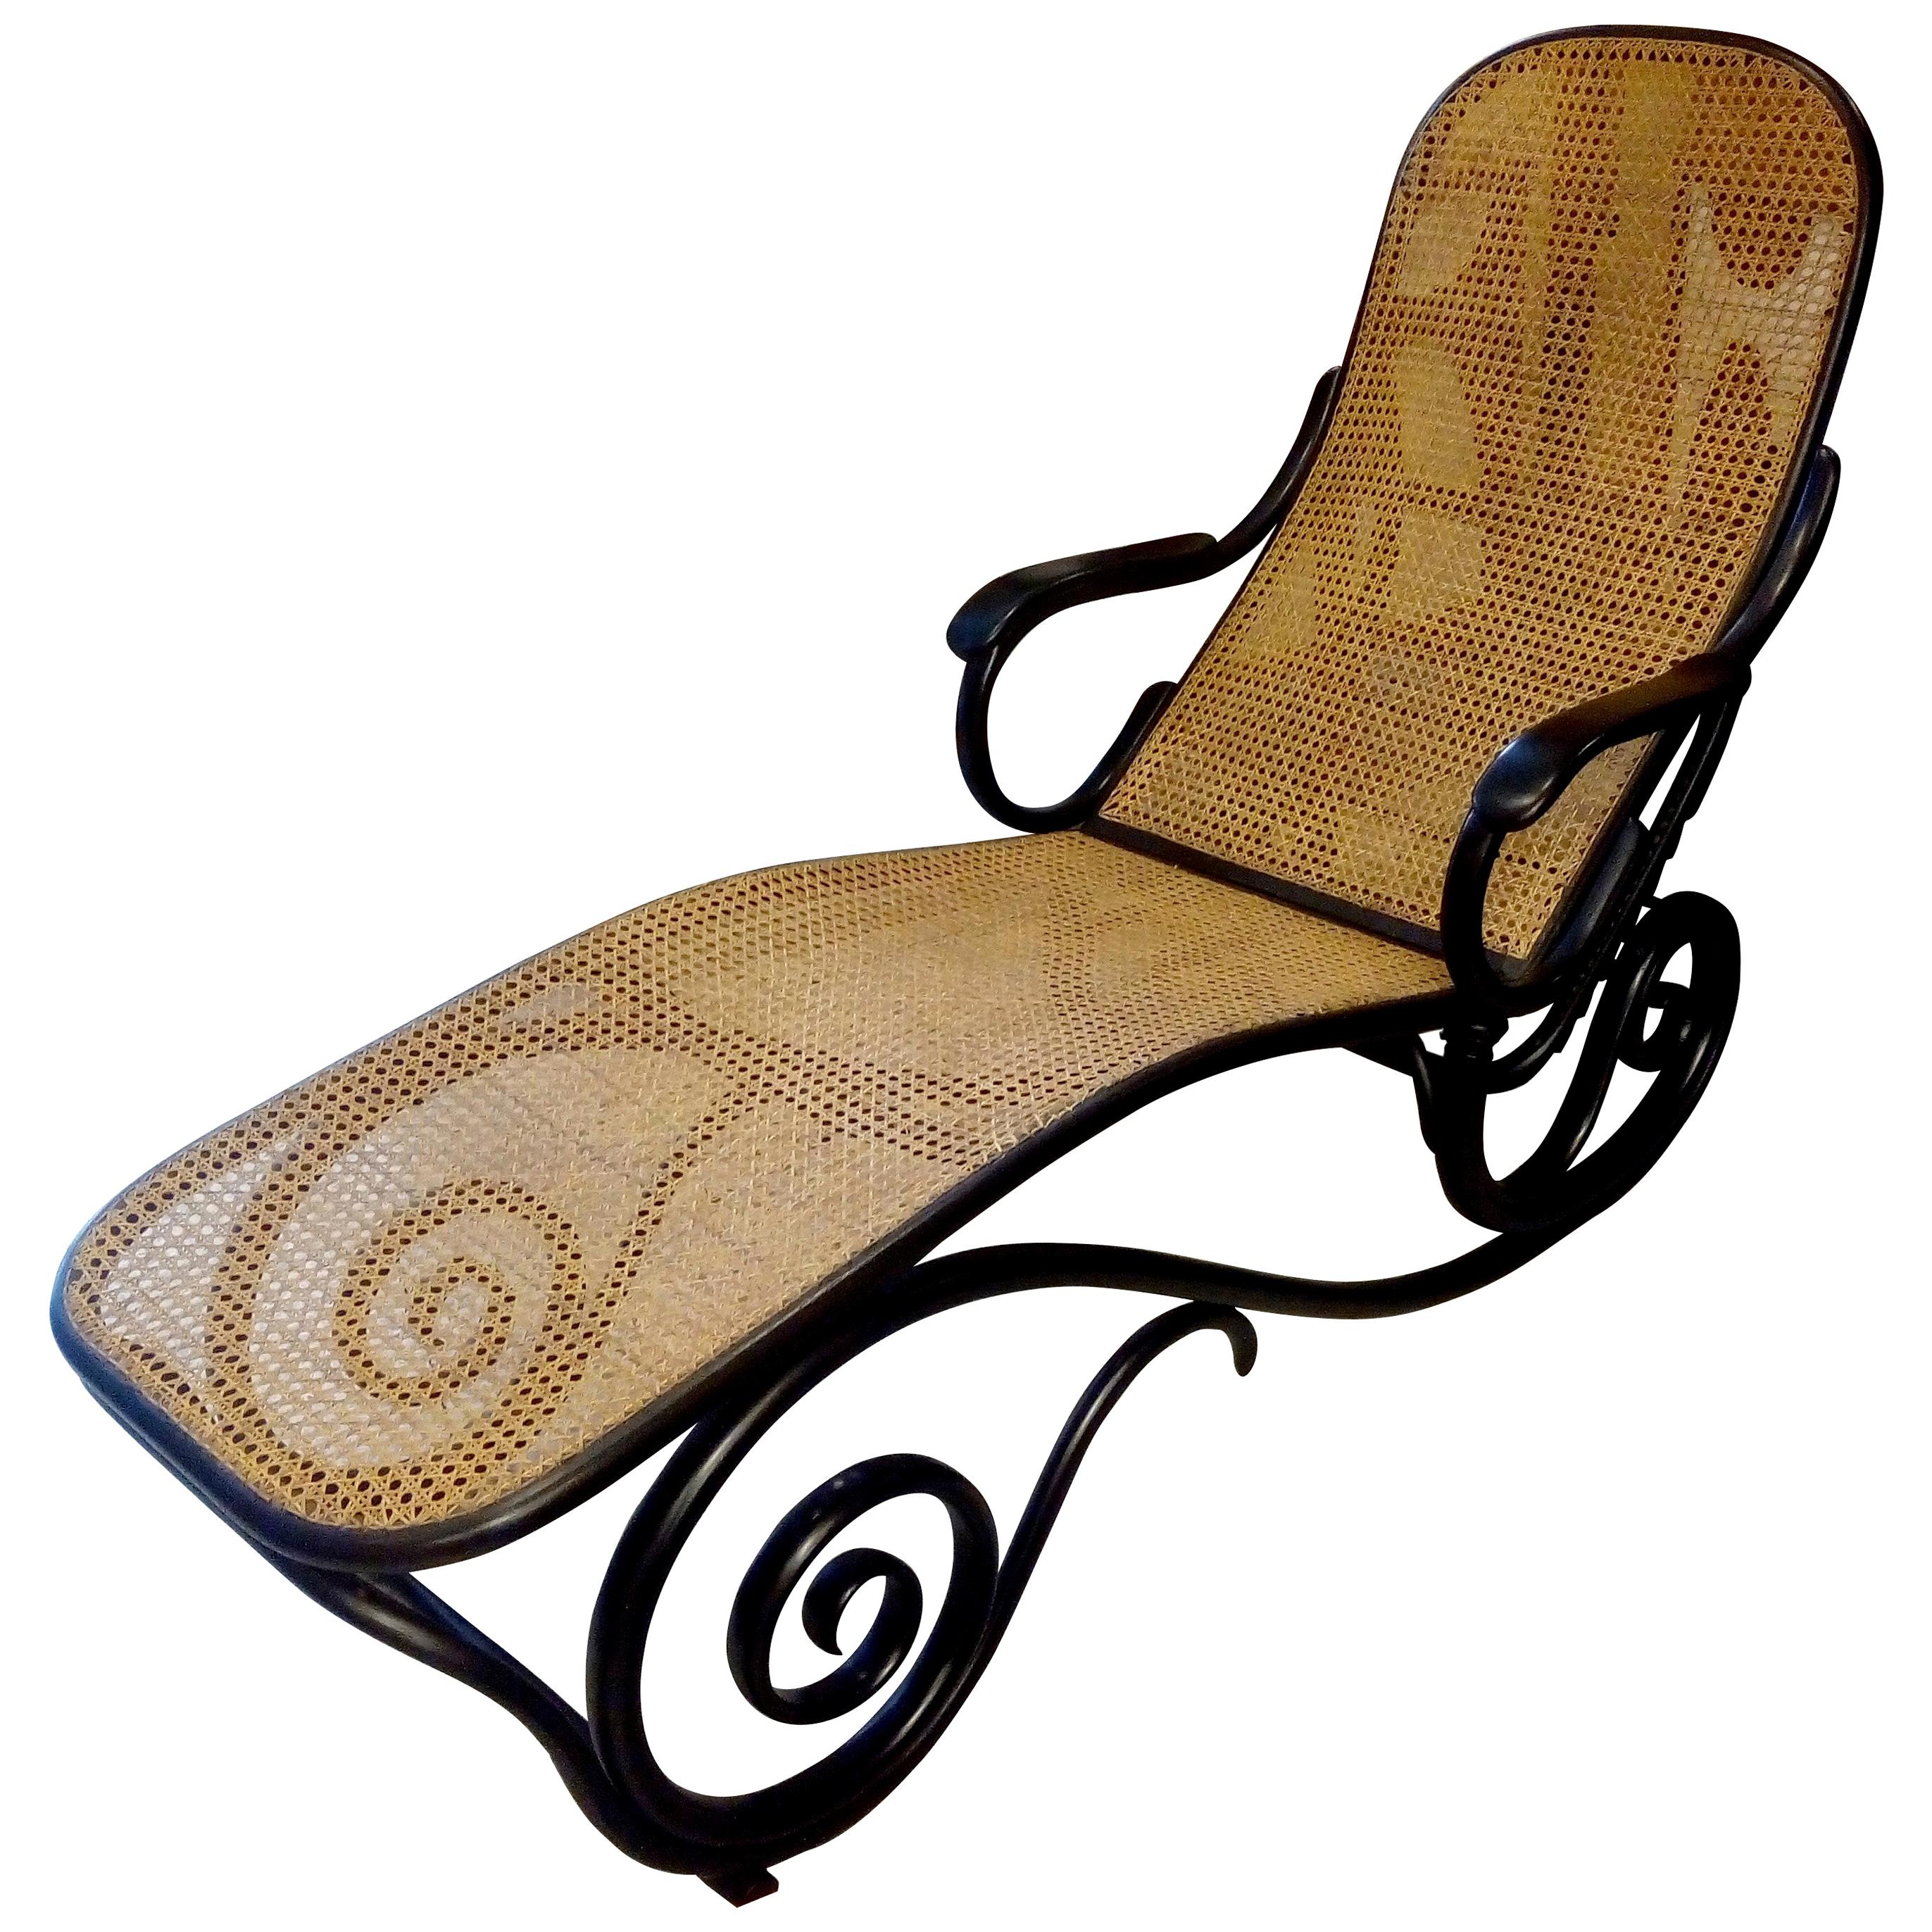 Adjustable Chaise Lounge Chair by Thonet in Bentwood and Cane from 1900